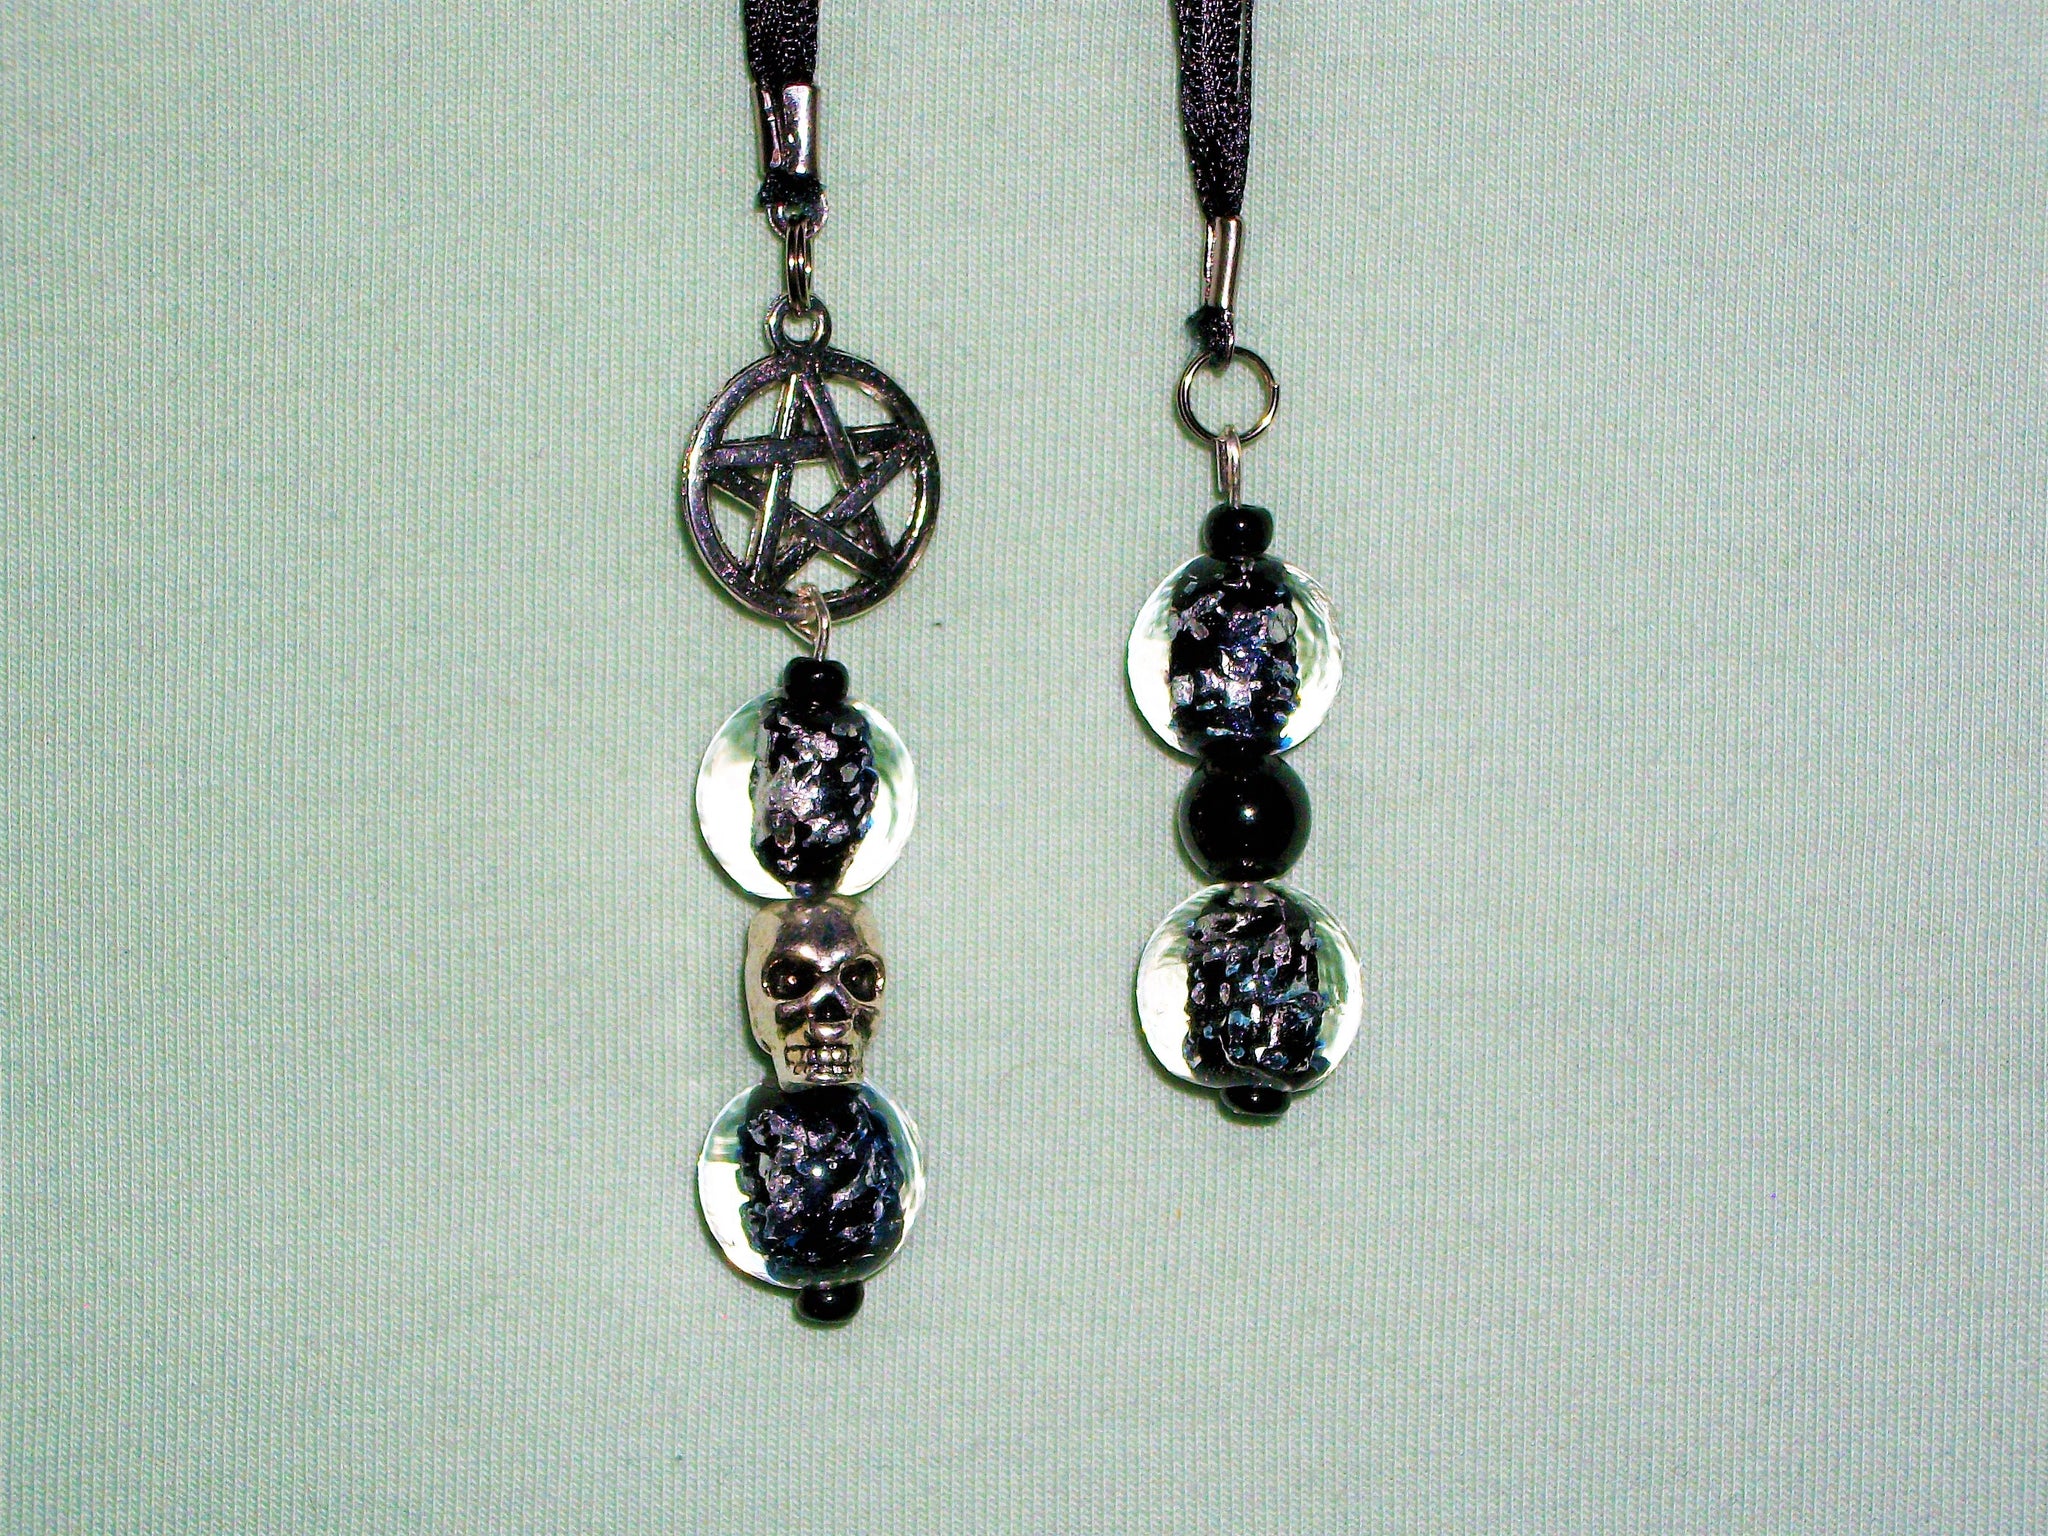 Black bookmark with black and silver beads and pentagram charm